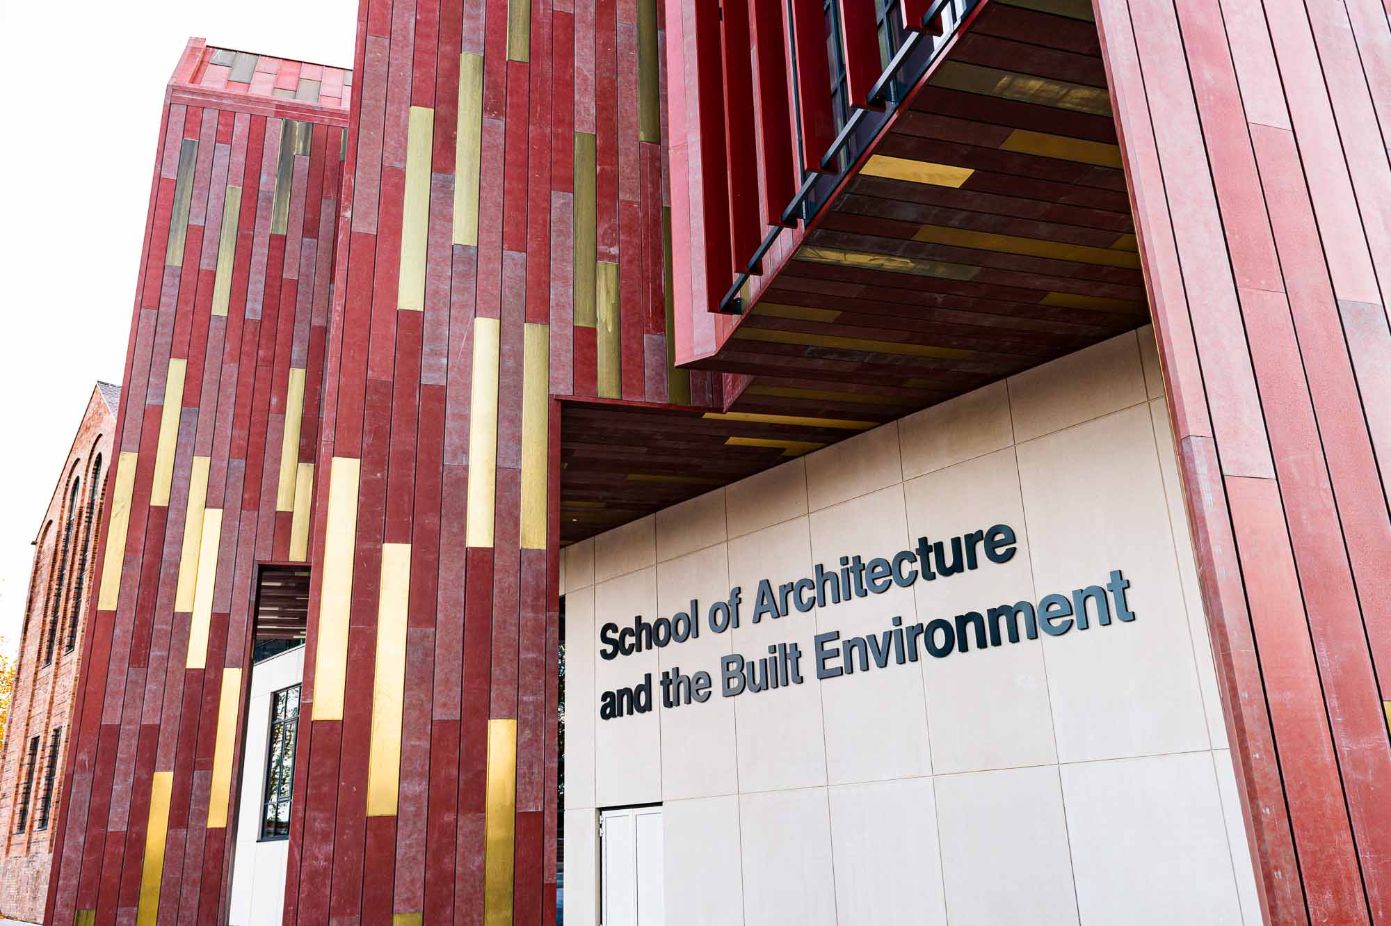 External view of the School of Architecture, signage by xsign